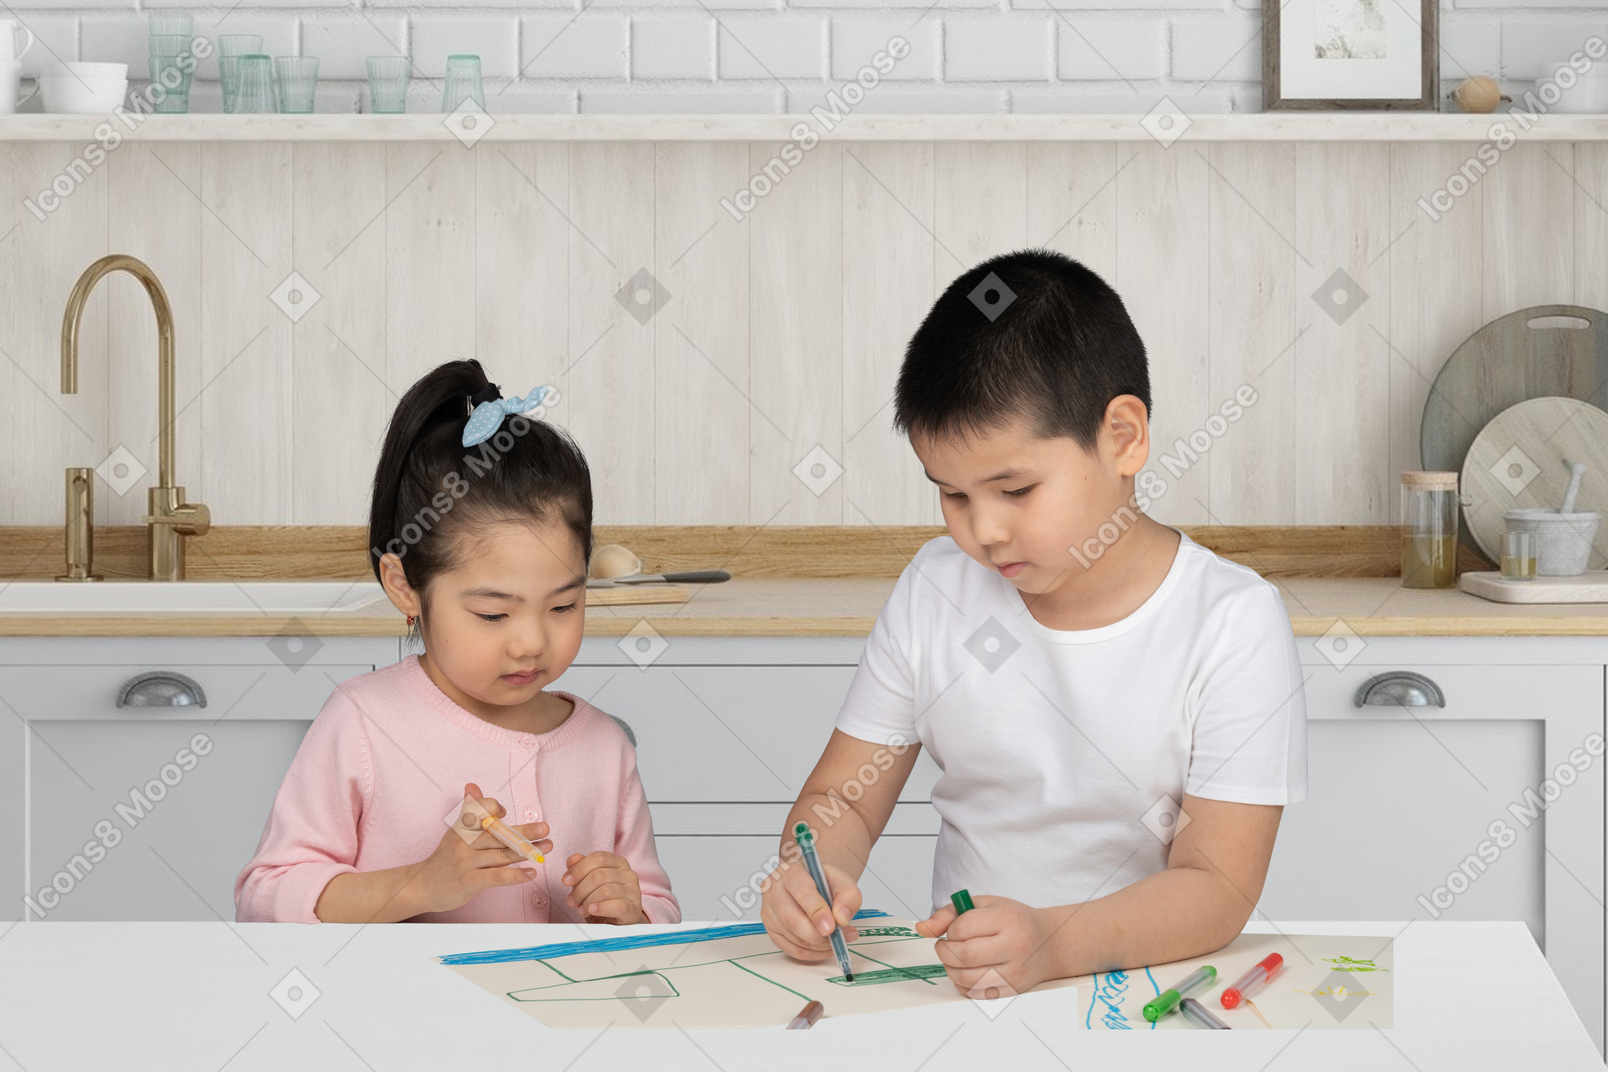 Little boy drawing a picture in the kitchen at home